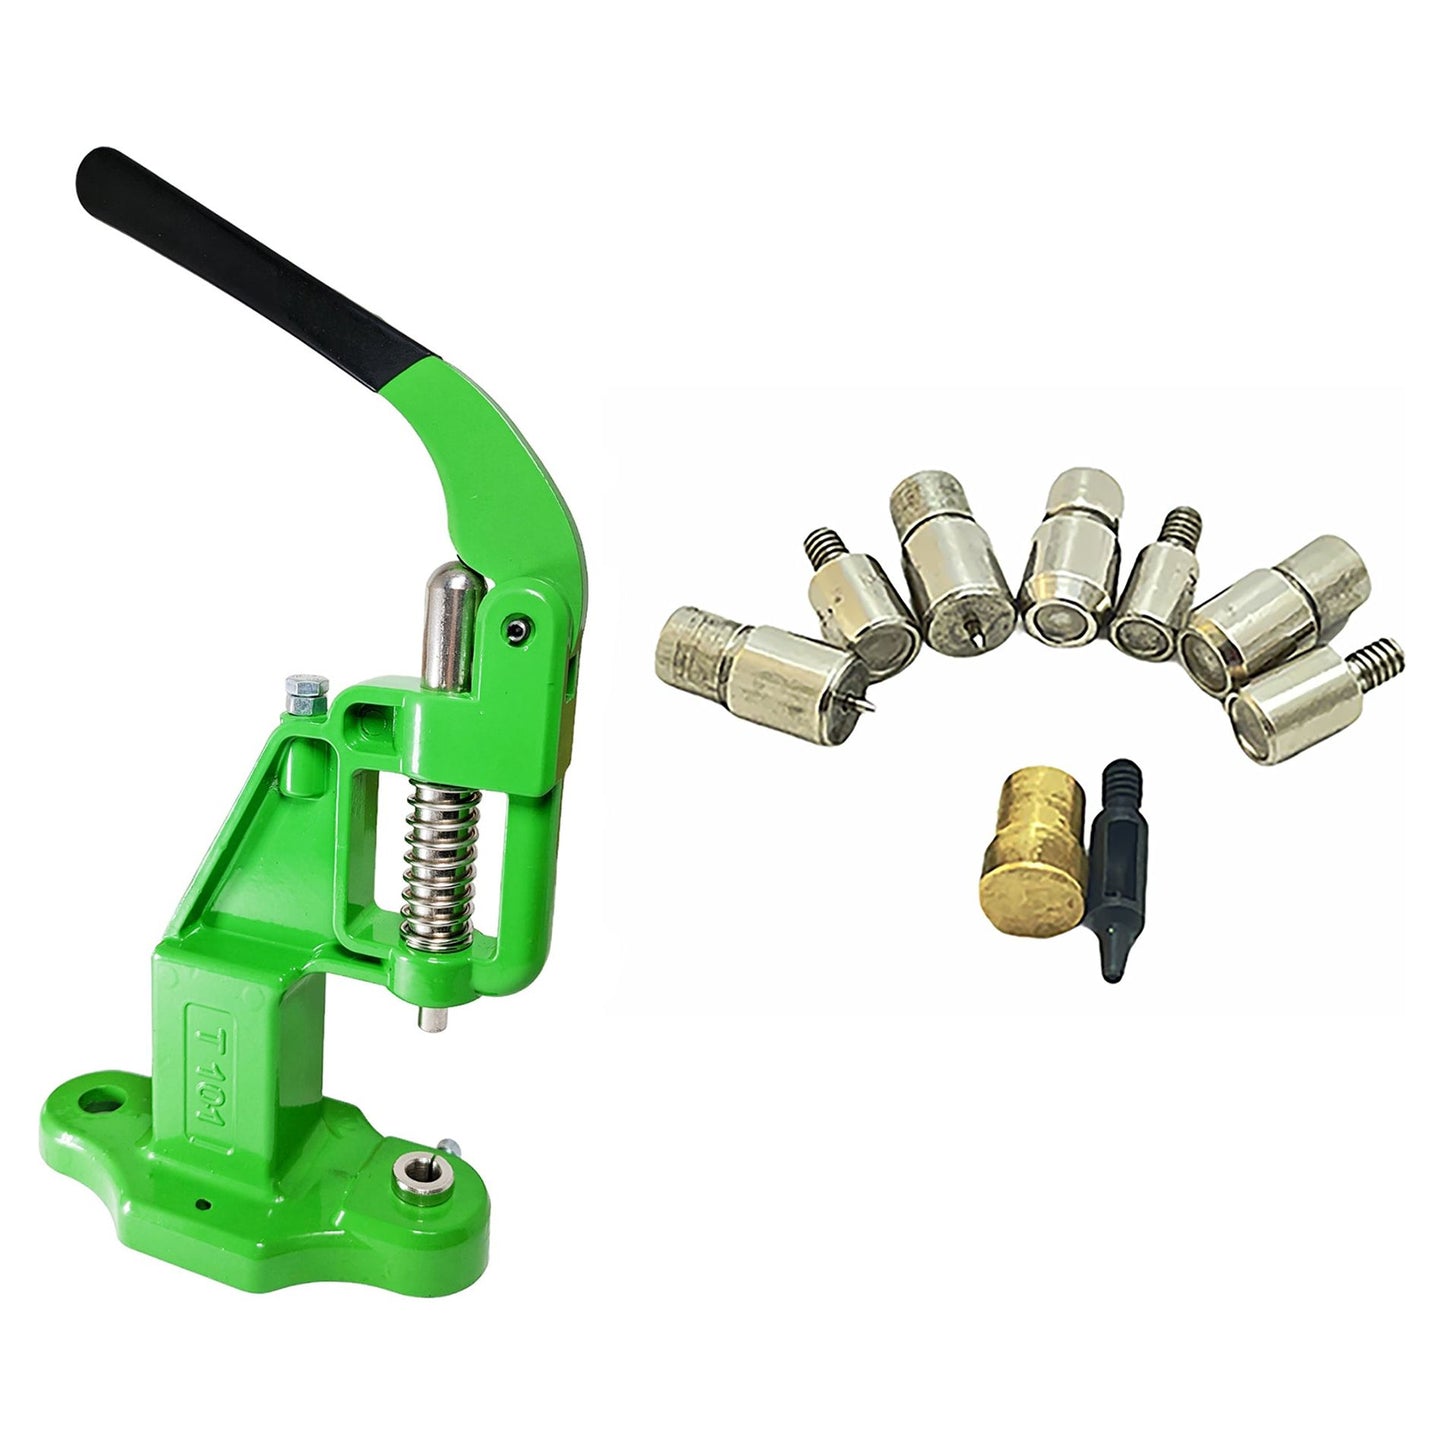 Essential Rivet Setting Kit with Hand Press Machine 4 Rivet Dies and 2 mm Hole Punch - Hobby Trendy